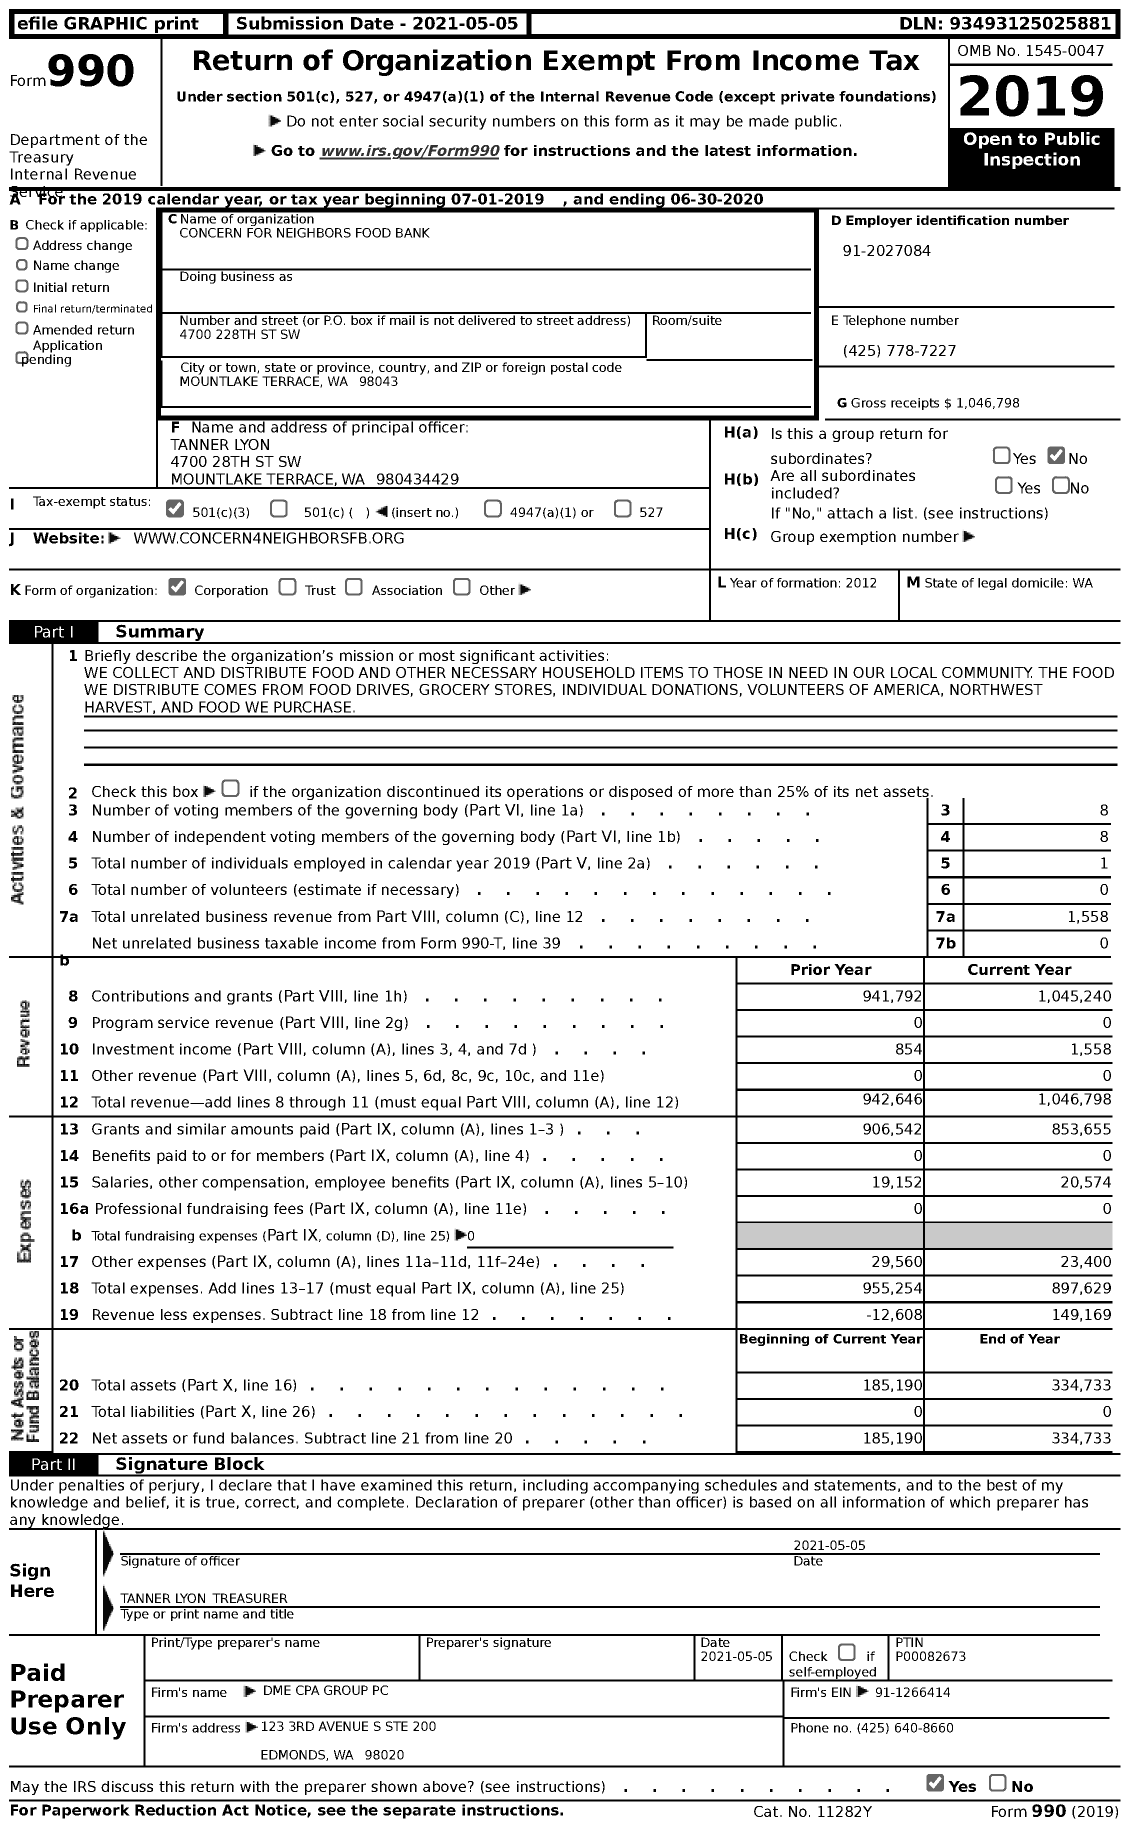 Image of first page of 2019 Form 990 for Concern for Neighbors Food Bank